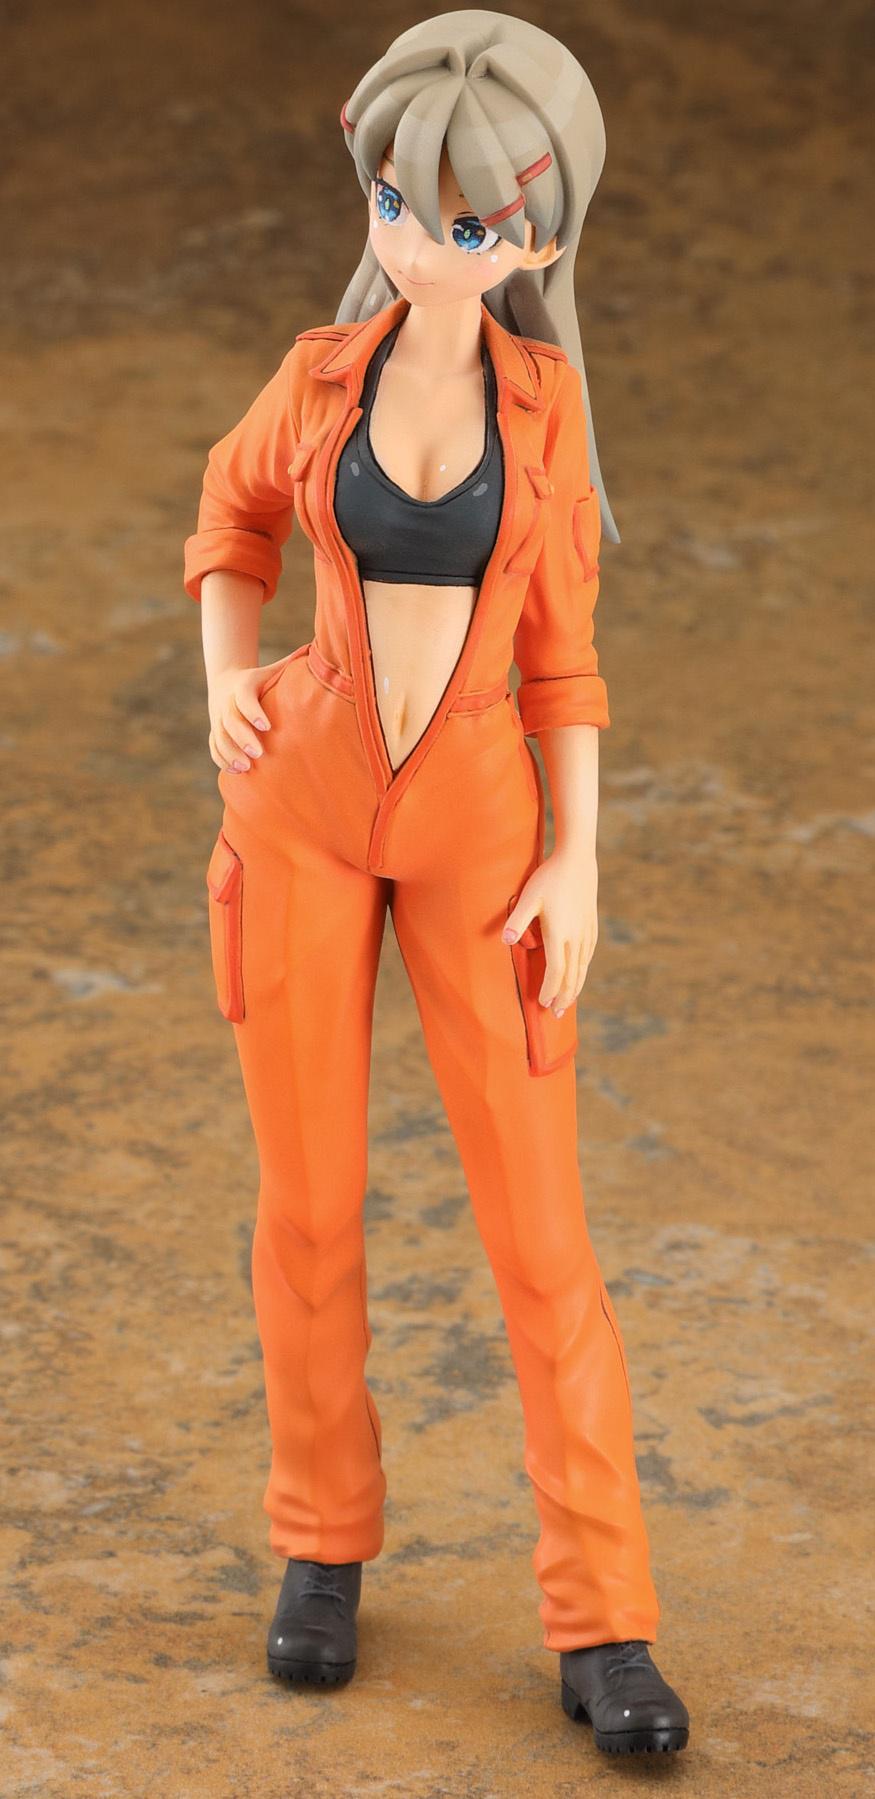 1/12  12 Egg Girls Collection No.25   Lucy McDonnell   COVERALLS